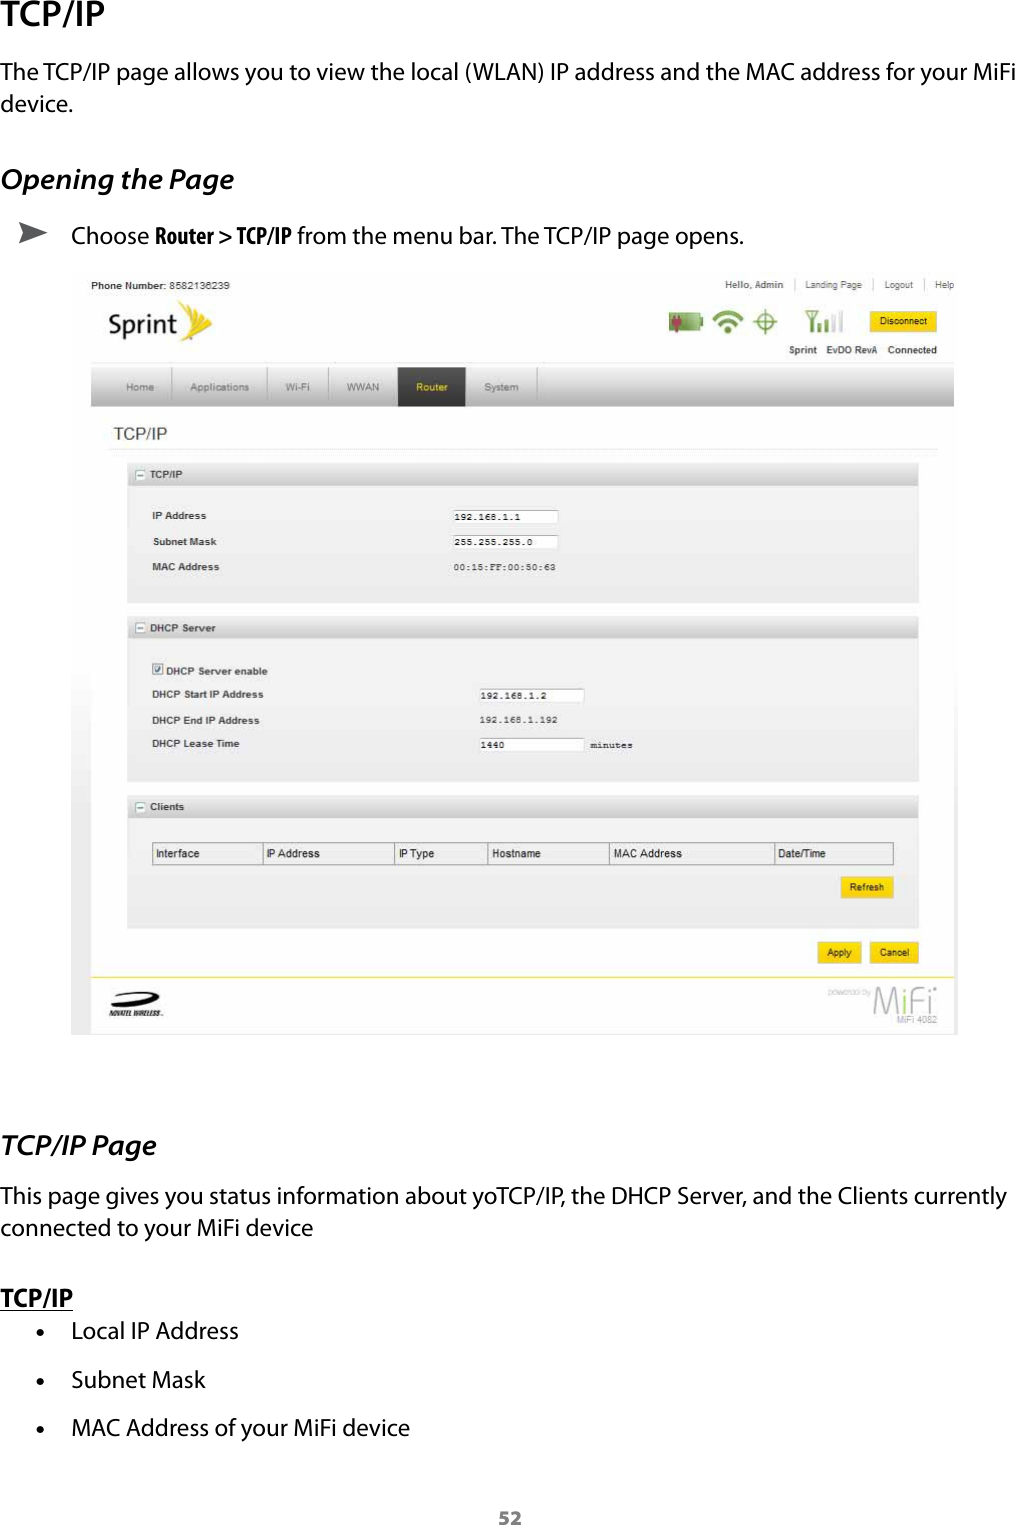 52TCP/IPThe TCP/IP page allows you to view the local (WLAN) IP address and the MAC address for your MiFi device.Opening the Page ➤ Choose Router &gt; TCP/IP from the menu bar. The TCP/IP page opens.TCP/IP PageThis page gives you status information about yoTCP/IP, the DHCP Server, and the Clients currently connected to your MiFi deviceTCP/IP •Local IP Address •Subnet Mask •MAC Address of your MiFi device